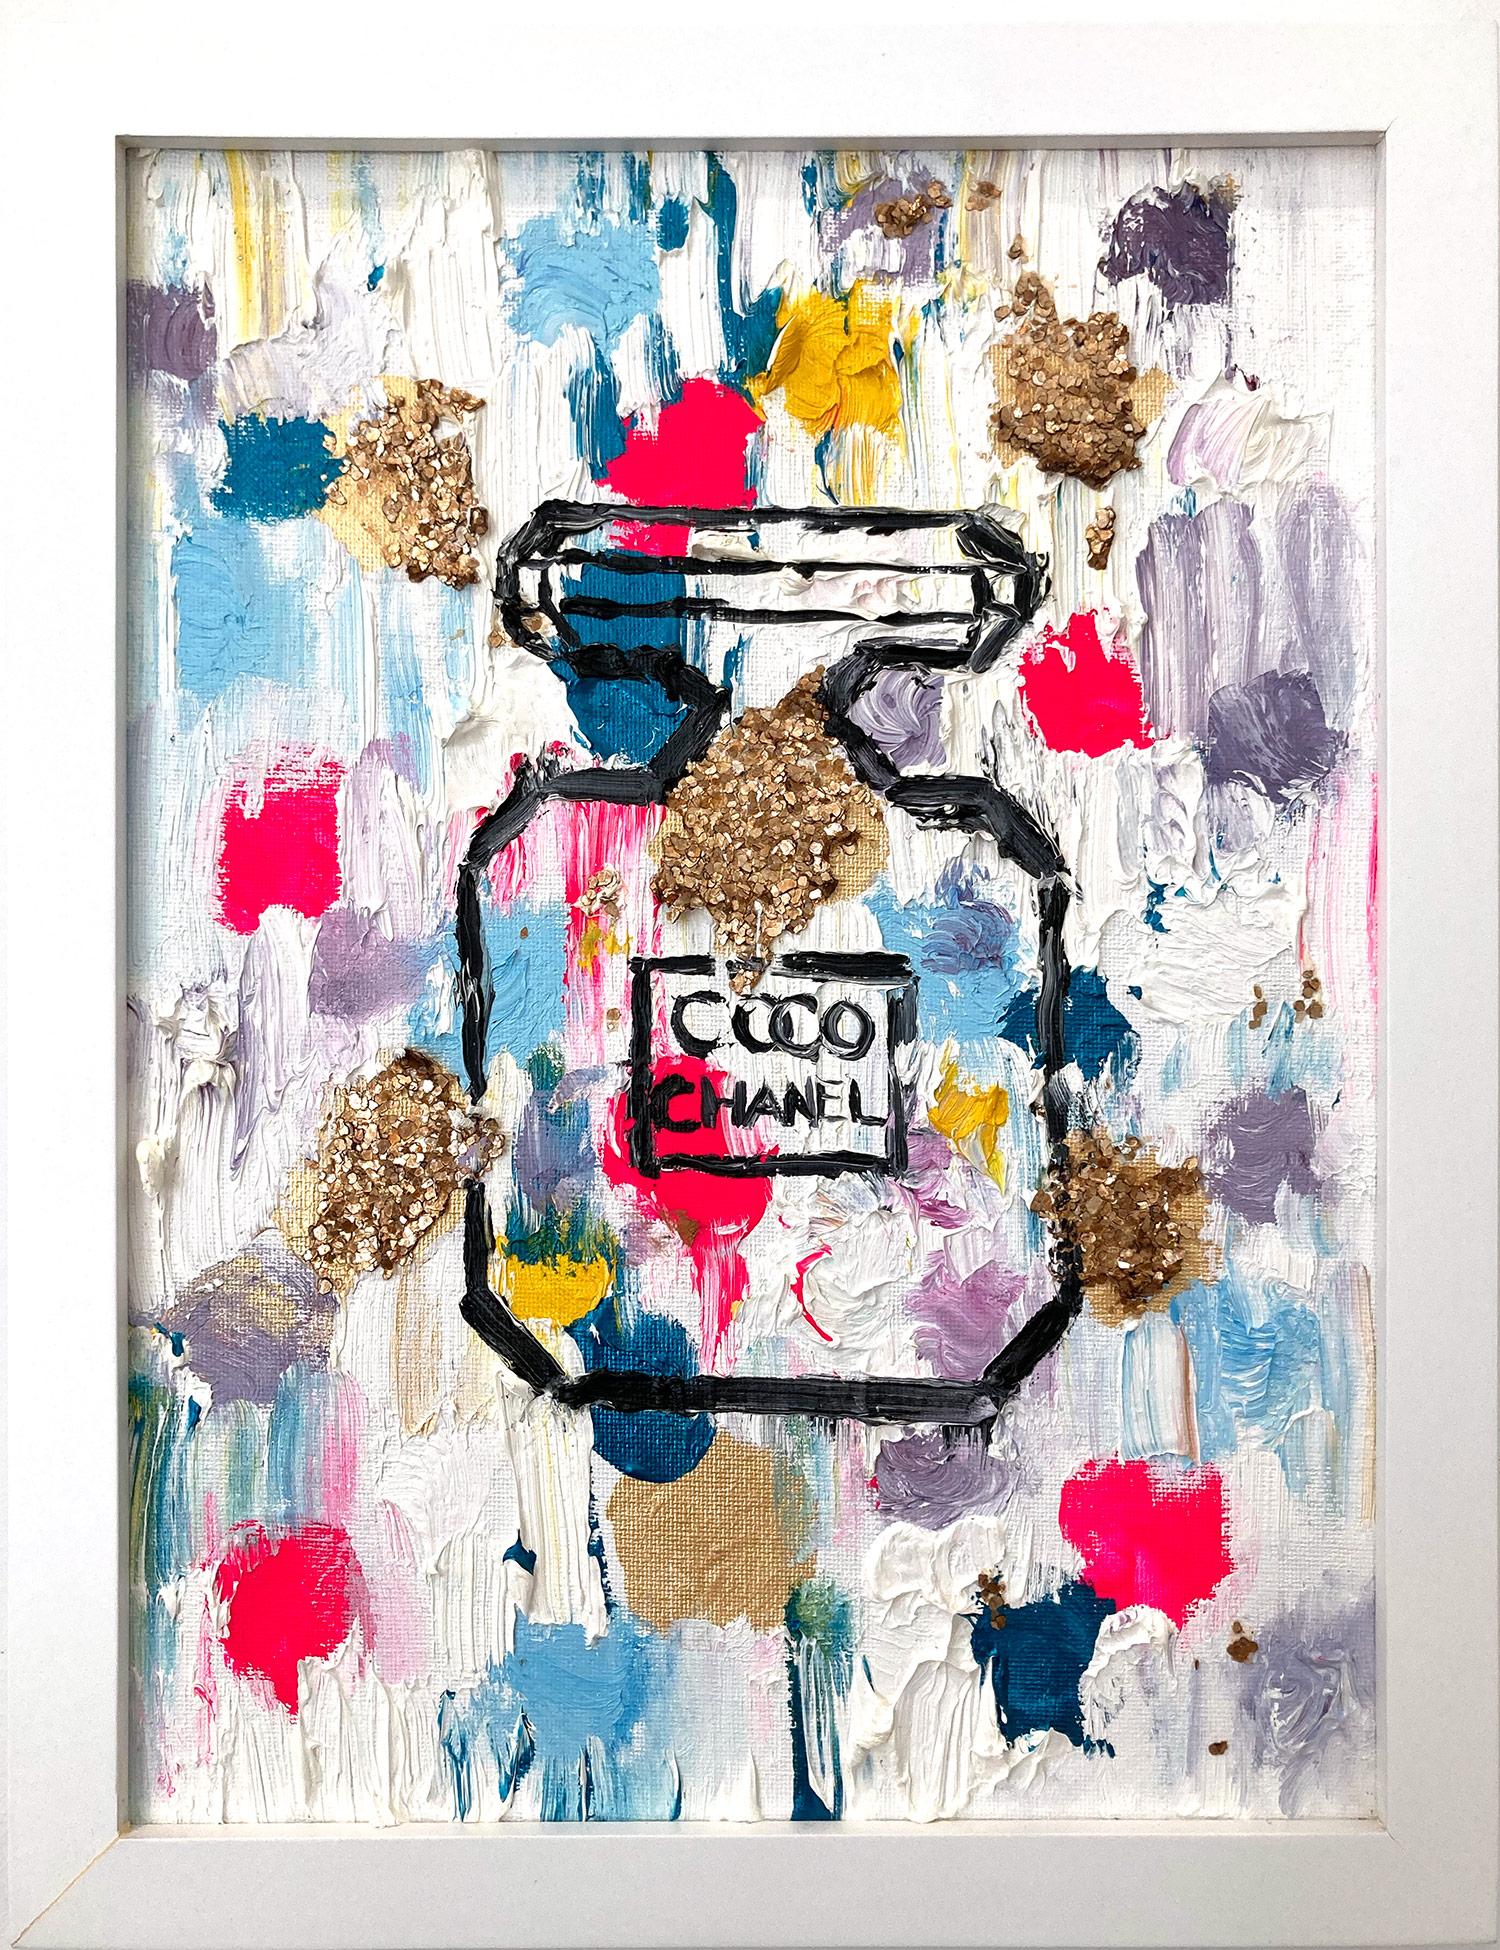 Cindy Shaoul Abstract Painting - "Dripping Dots - Chanel in Province" Contemporary Perfume Bottle Chanel Painting